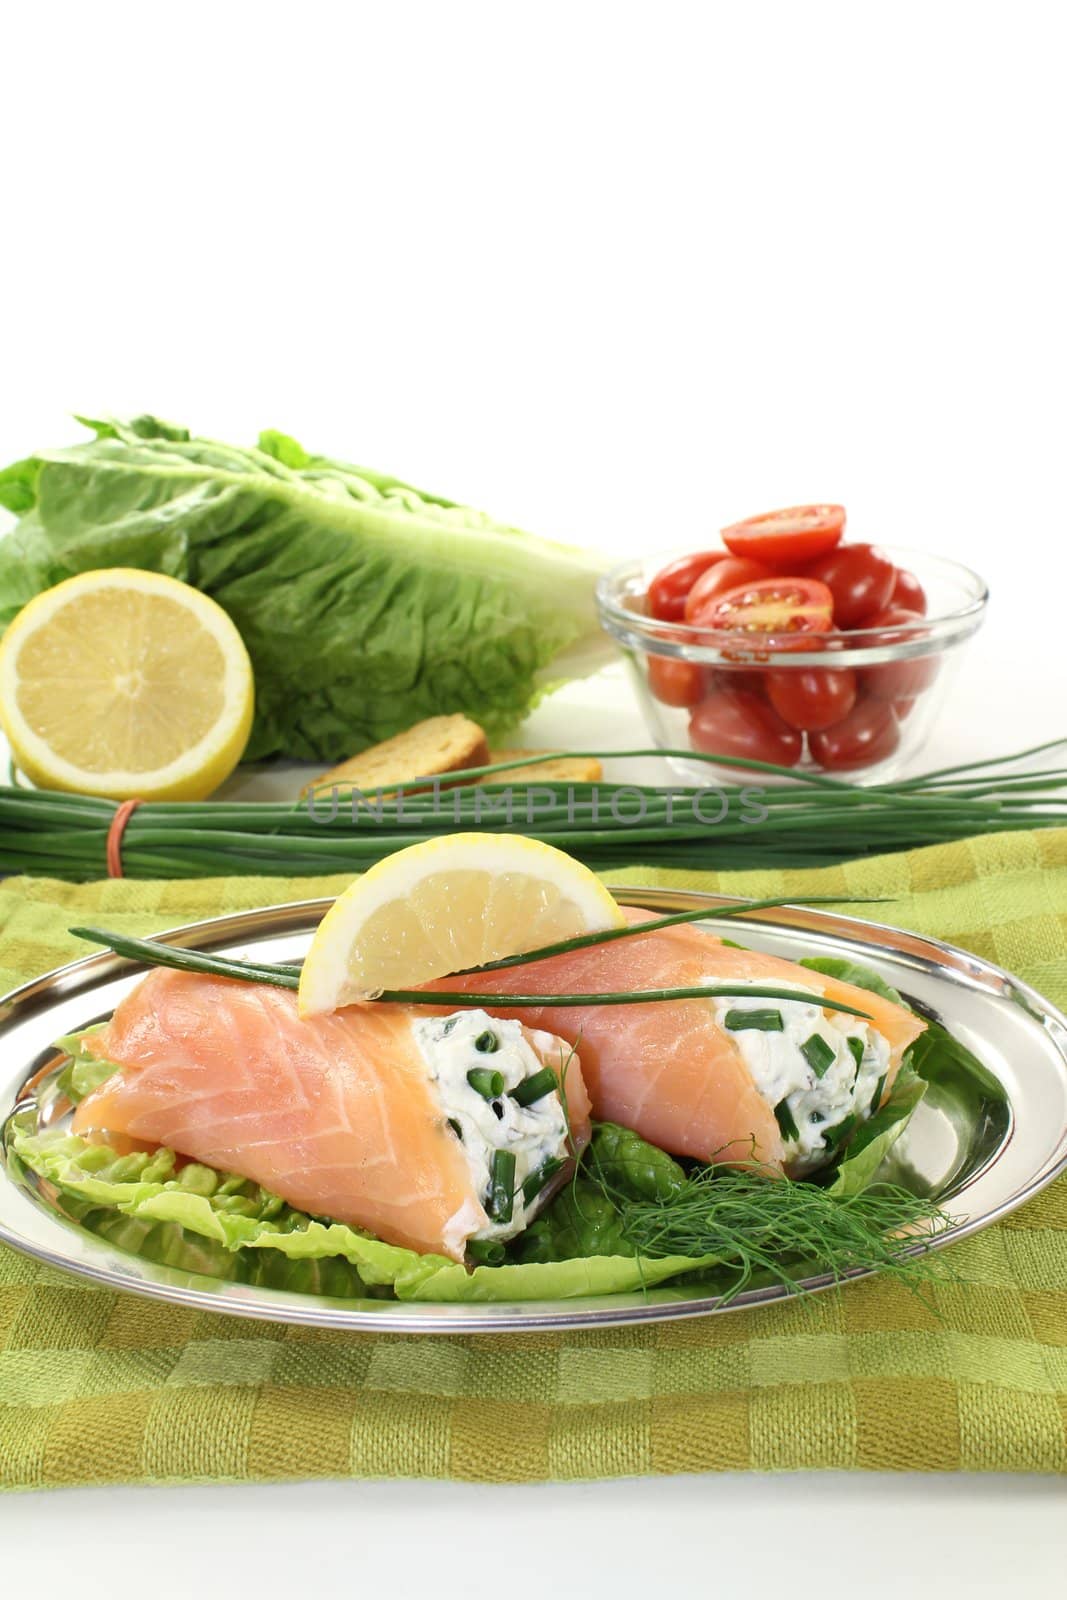 Salmon rolls with cream cheese and chives on a light background